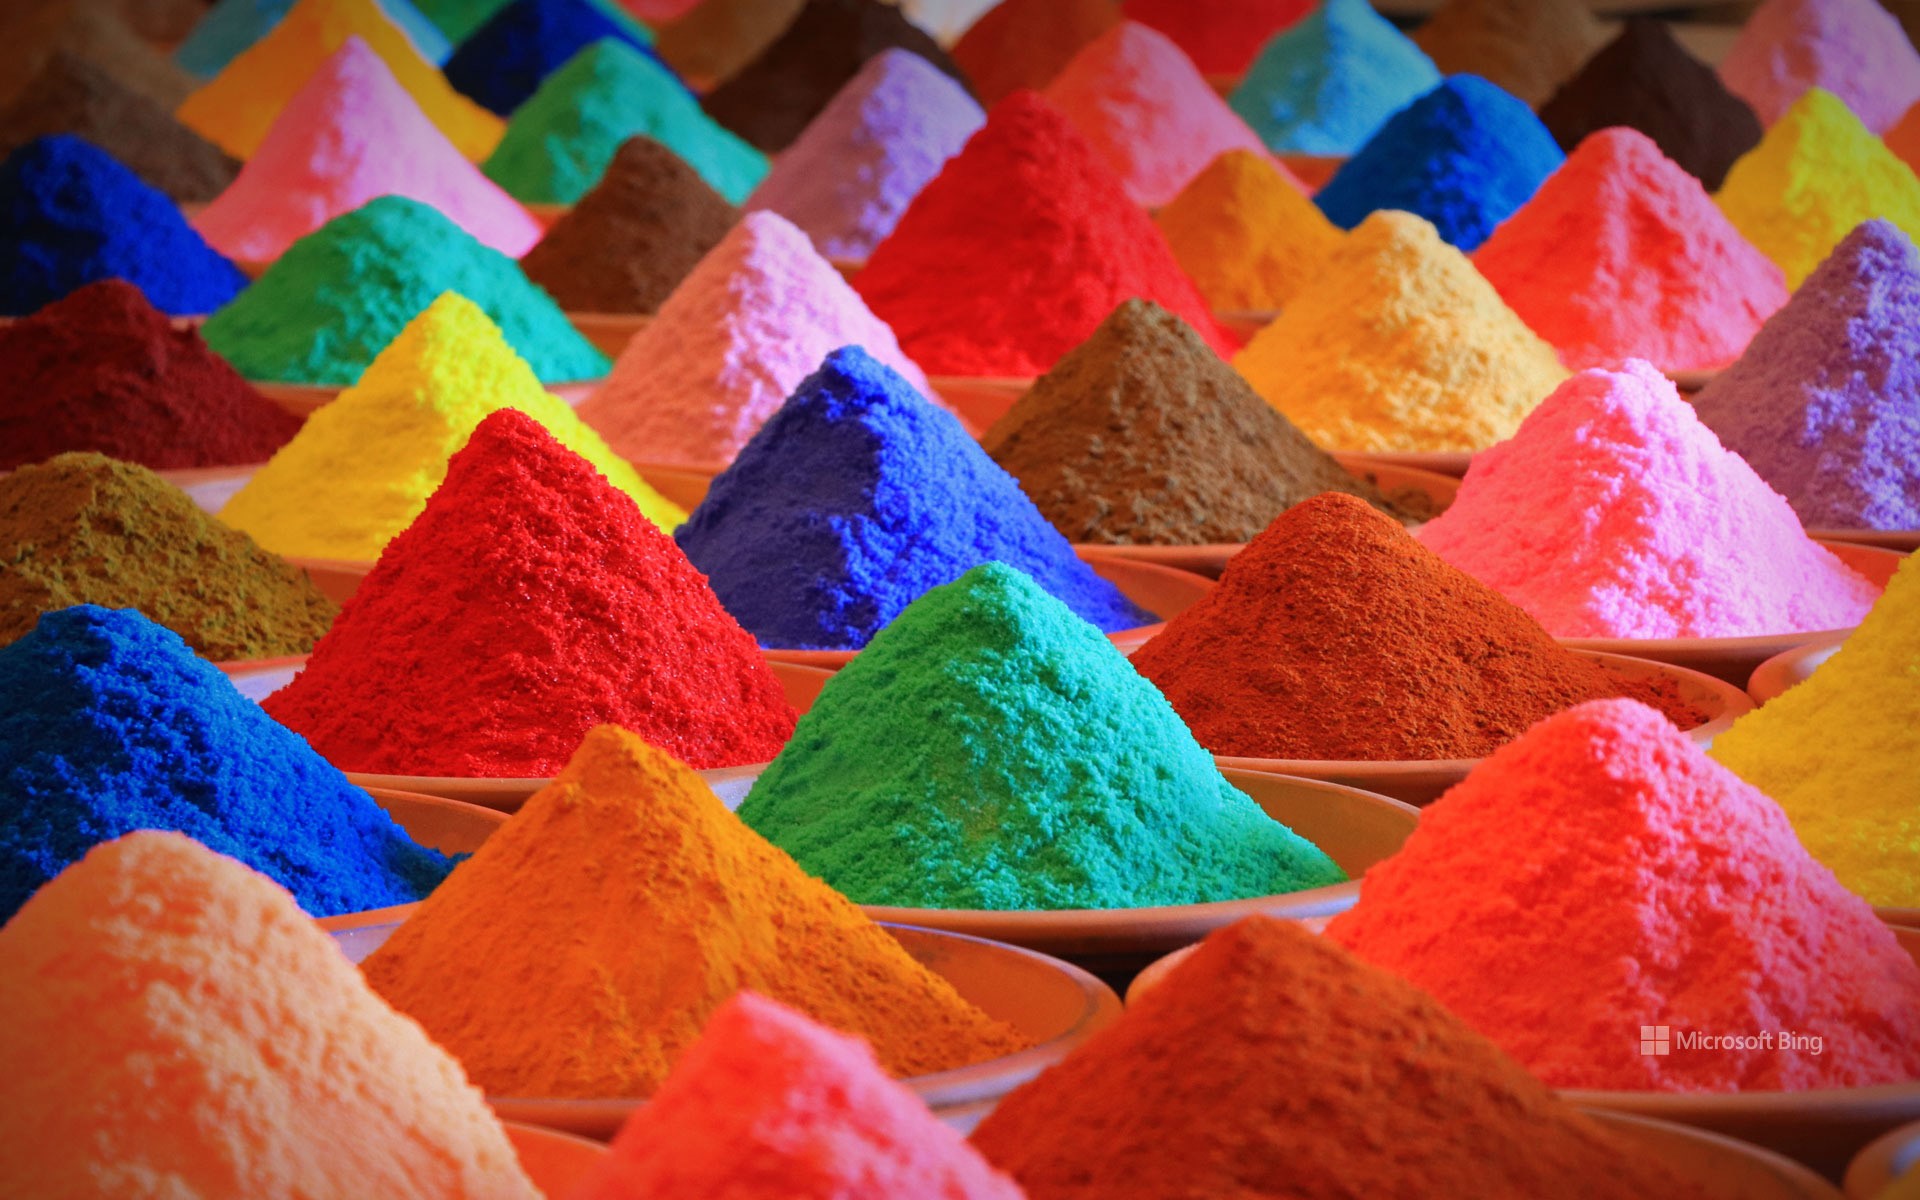 Colourful powders for sale during the festival of Holi